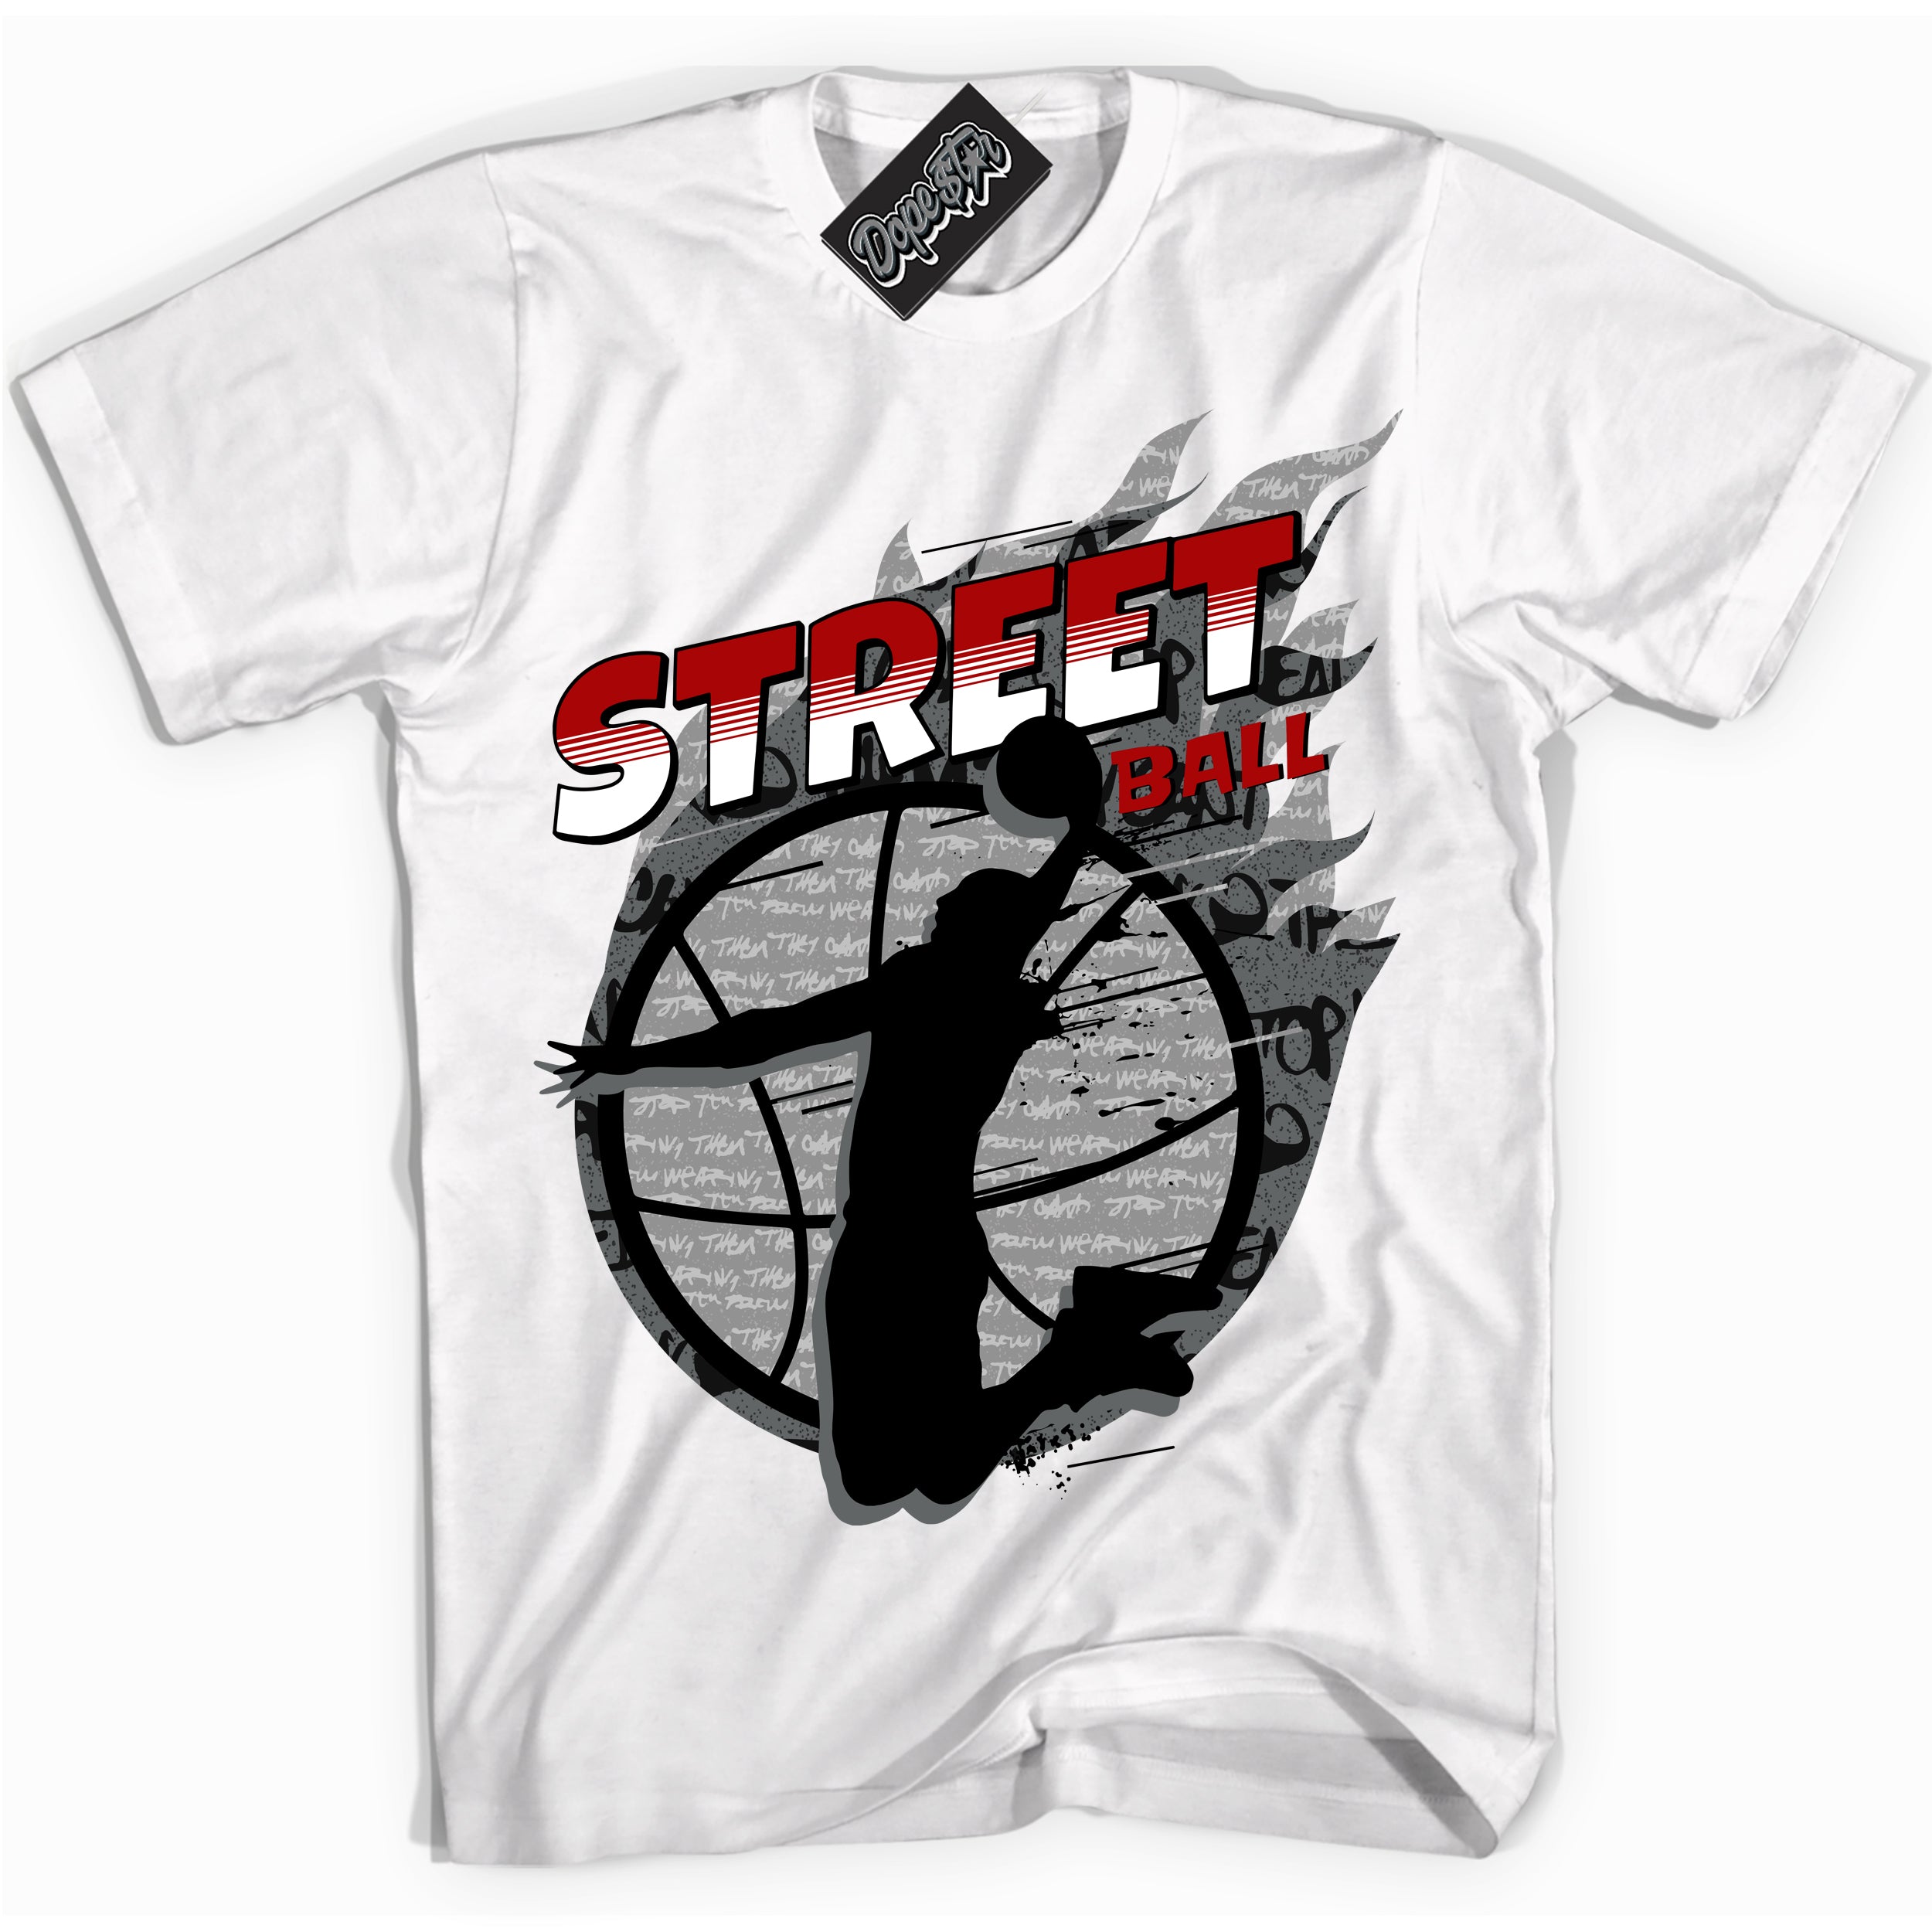 Cool White Shirt with “ Street Ball ” design that perfectly matches Rebellionaire 1s Sneakers.